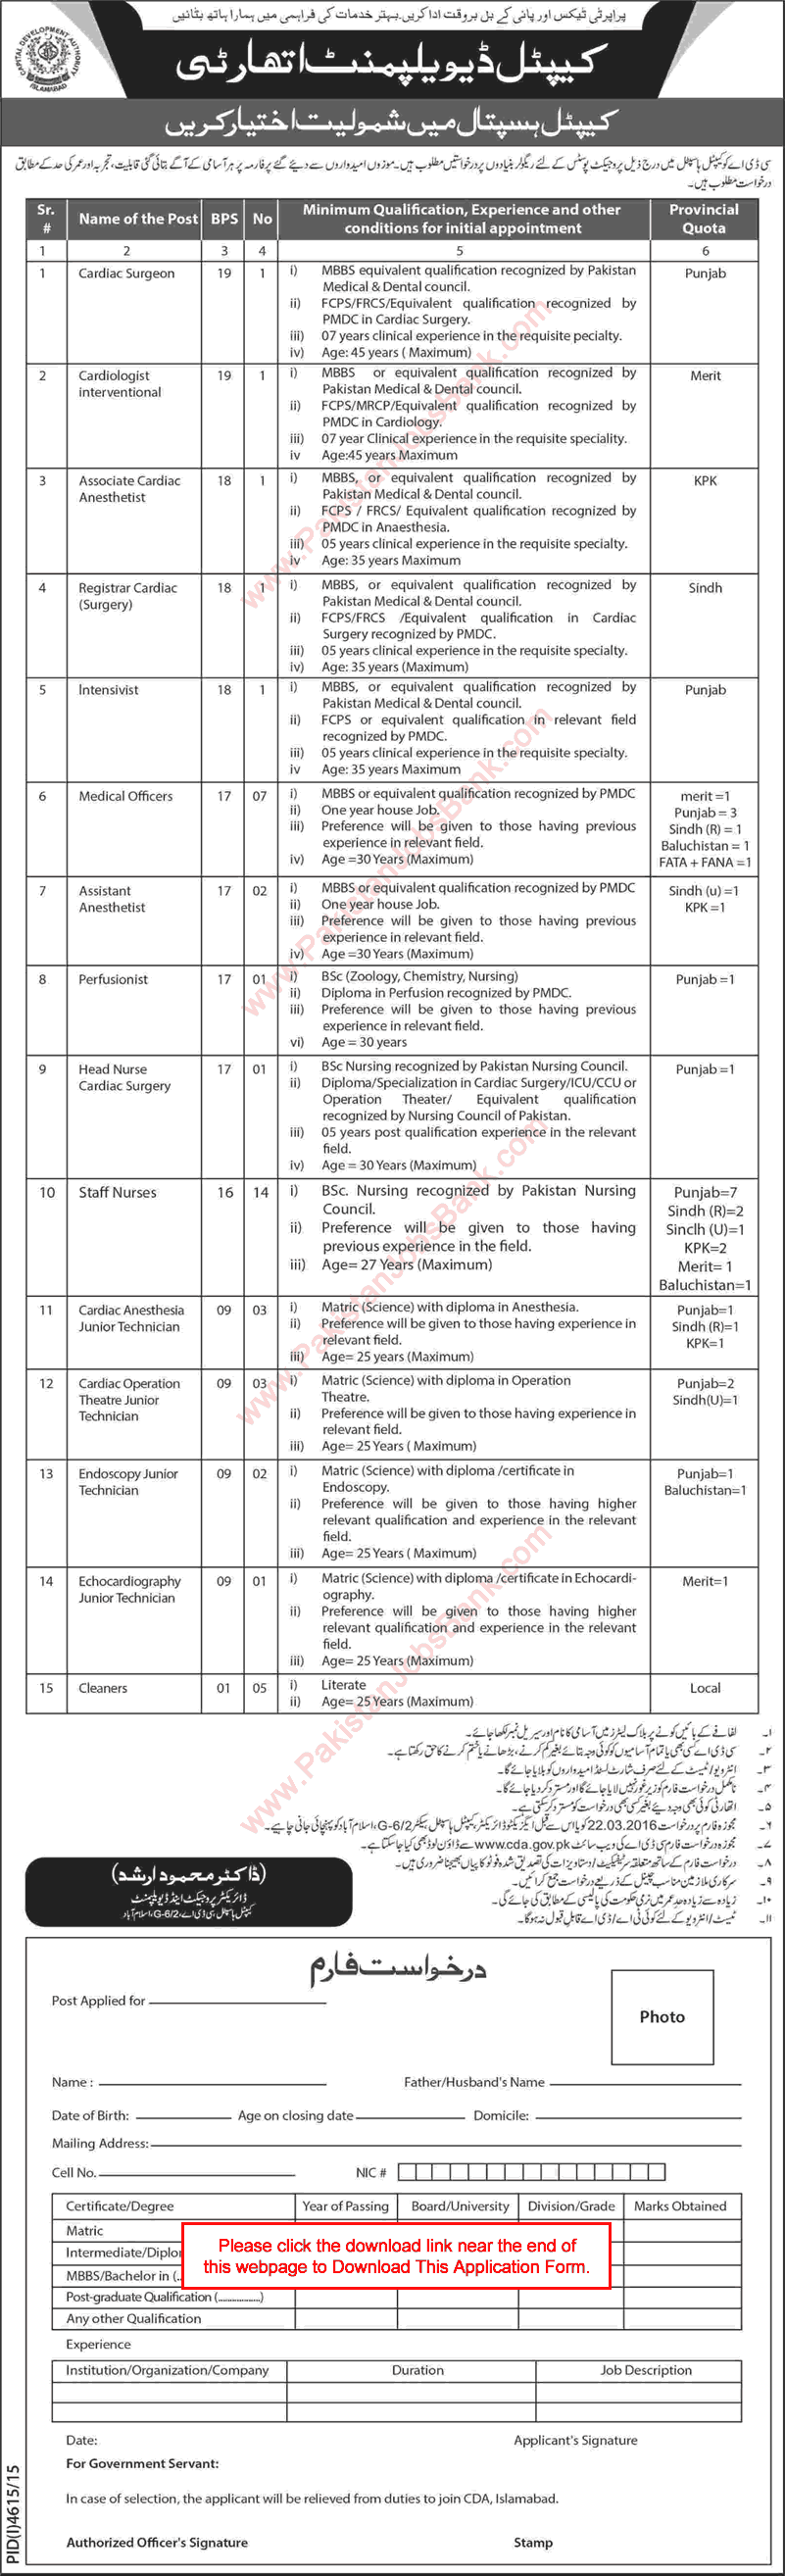 CDA Hospital Islamabad Jobs 2016 March Application Form Staff Nurses, Medical Officers, Technicians & Others Latest